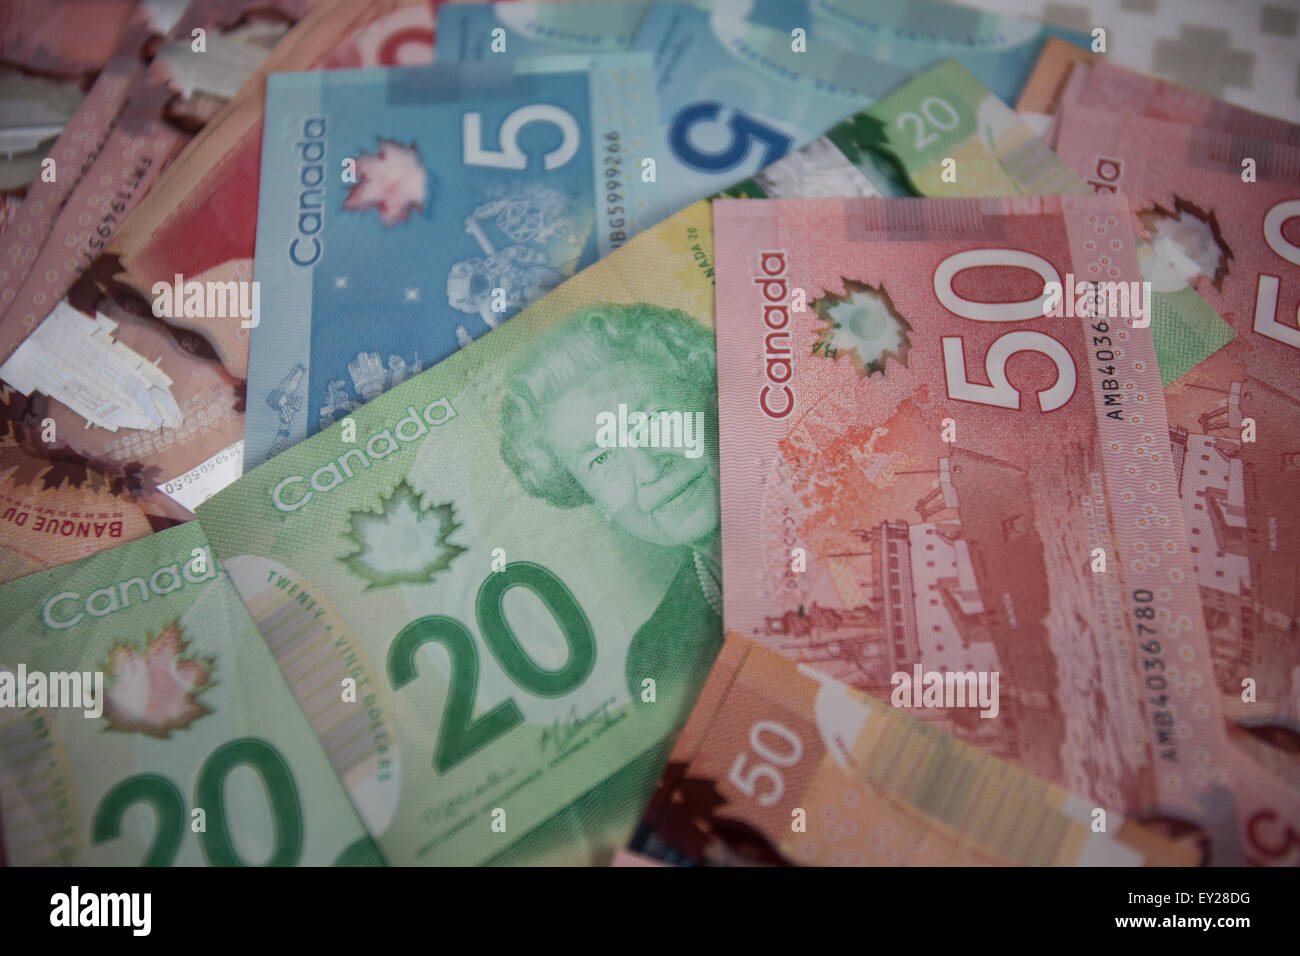 Canadian dollar bill 50 hi-res stock photography and images - Alamy